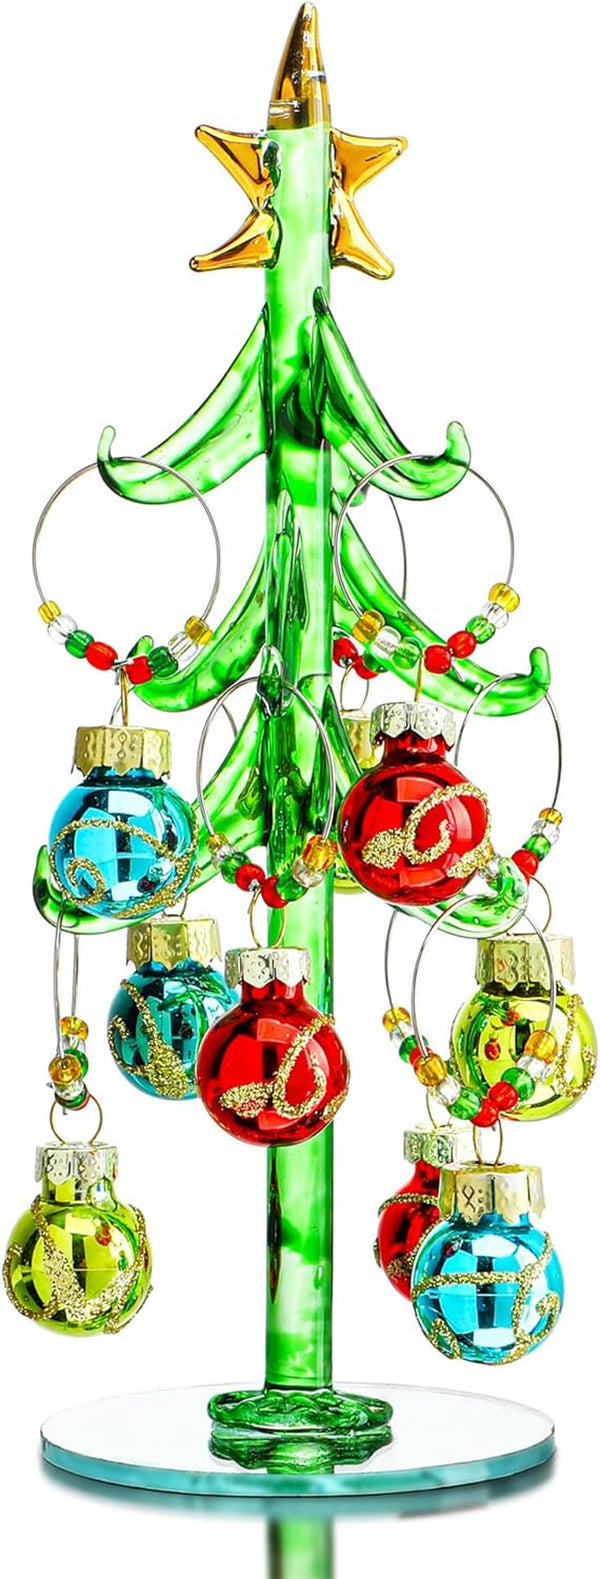 HDCRYSTALGIFTS 9pcs Christmas Ball Wine Glass Charms Markers Tags With Christmas Tree Ornament,Holiday Themed Wine Tasting For Party Decoration Supplies